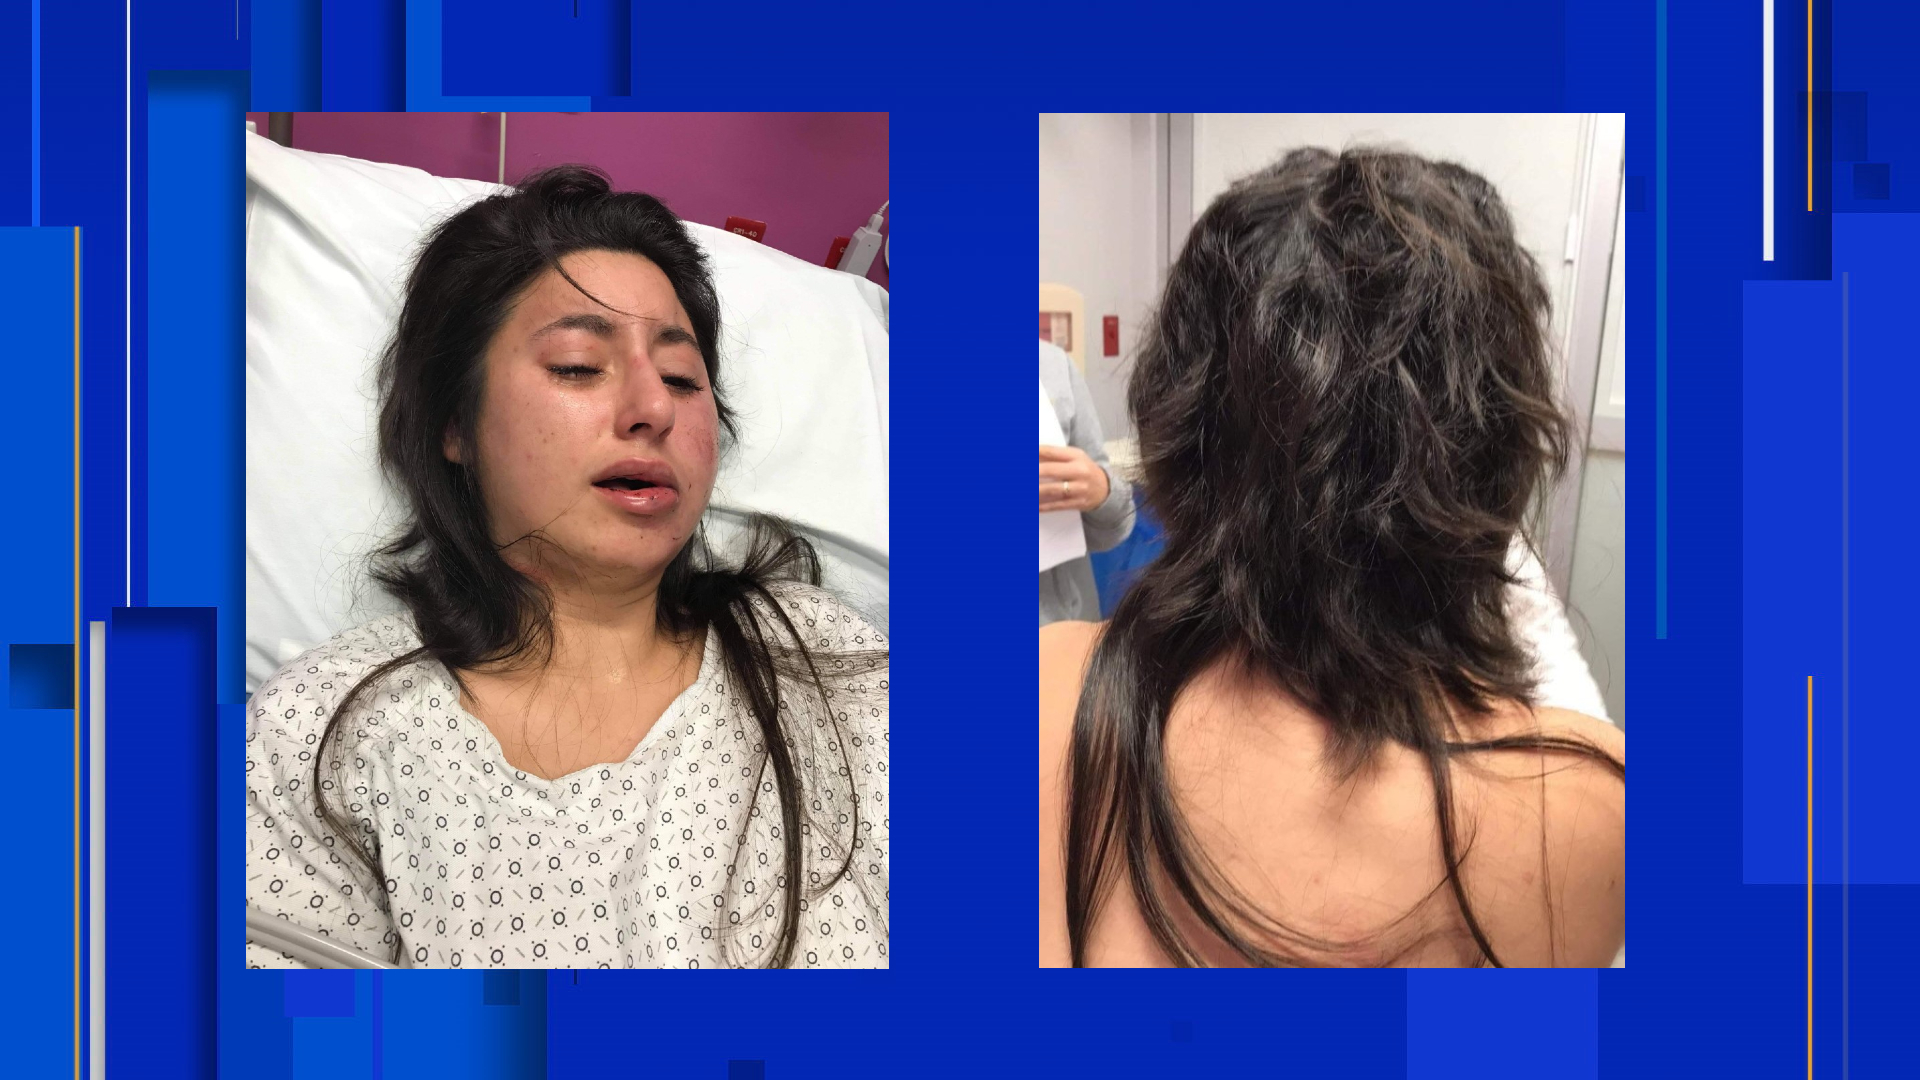 Strangers barge into home, attack Florida woman, cut her hair